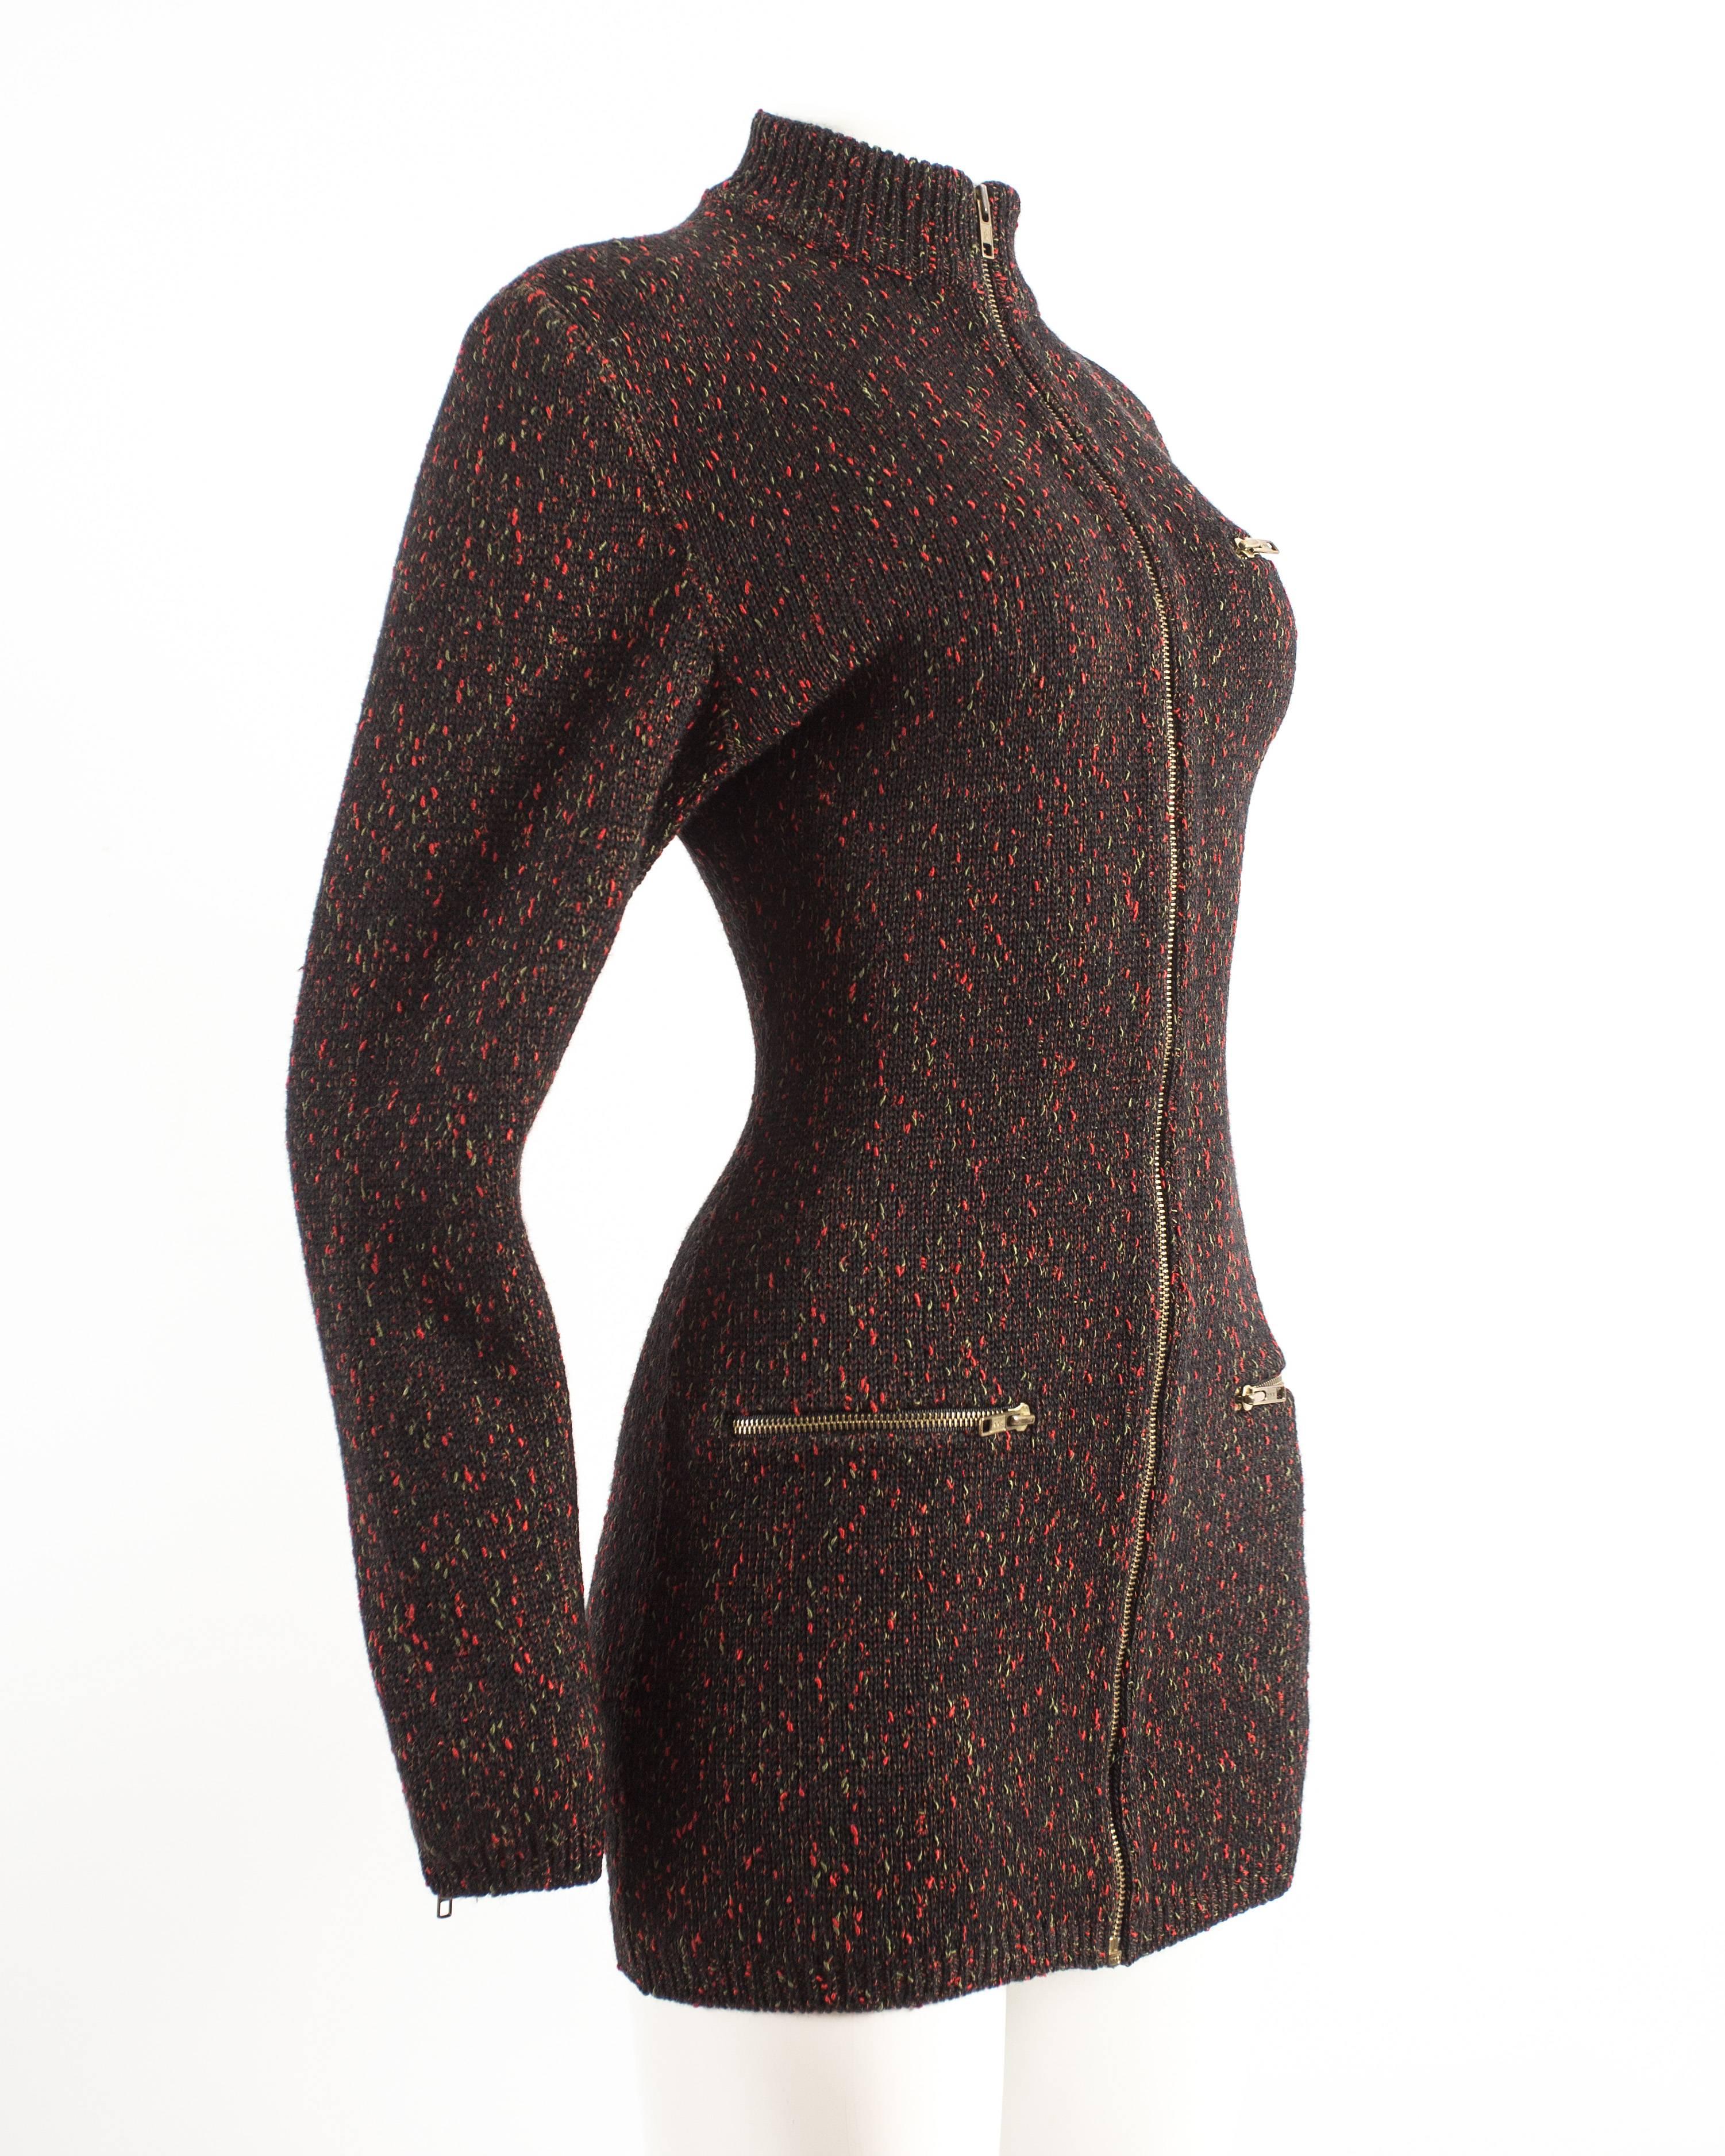 Alaia Autumn-Winter 1986 knitted zipper mini dress In Excellent Condition For Sale In London, GB